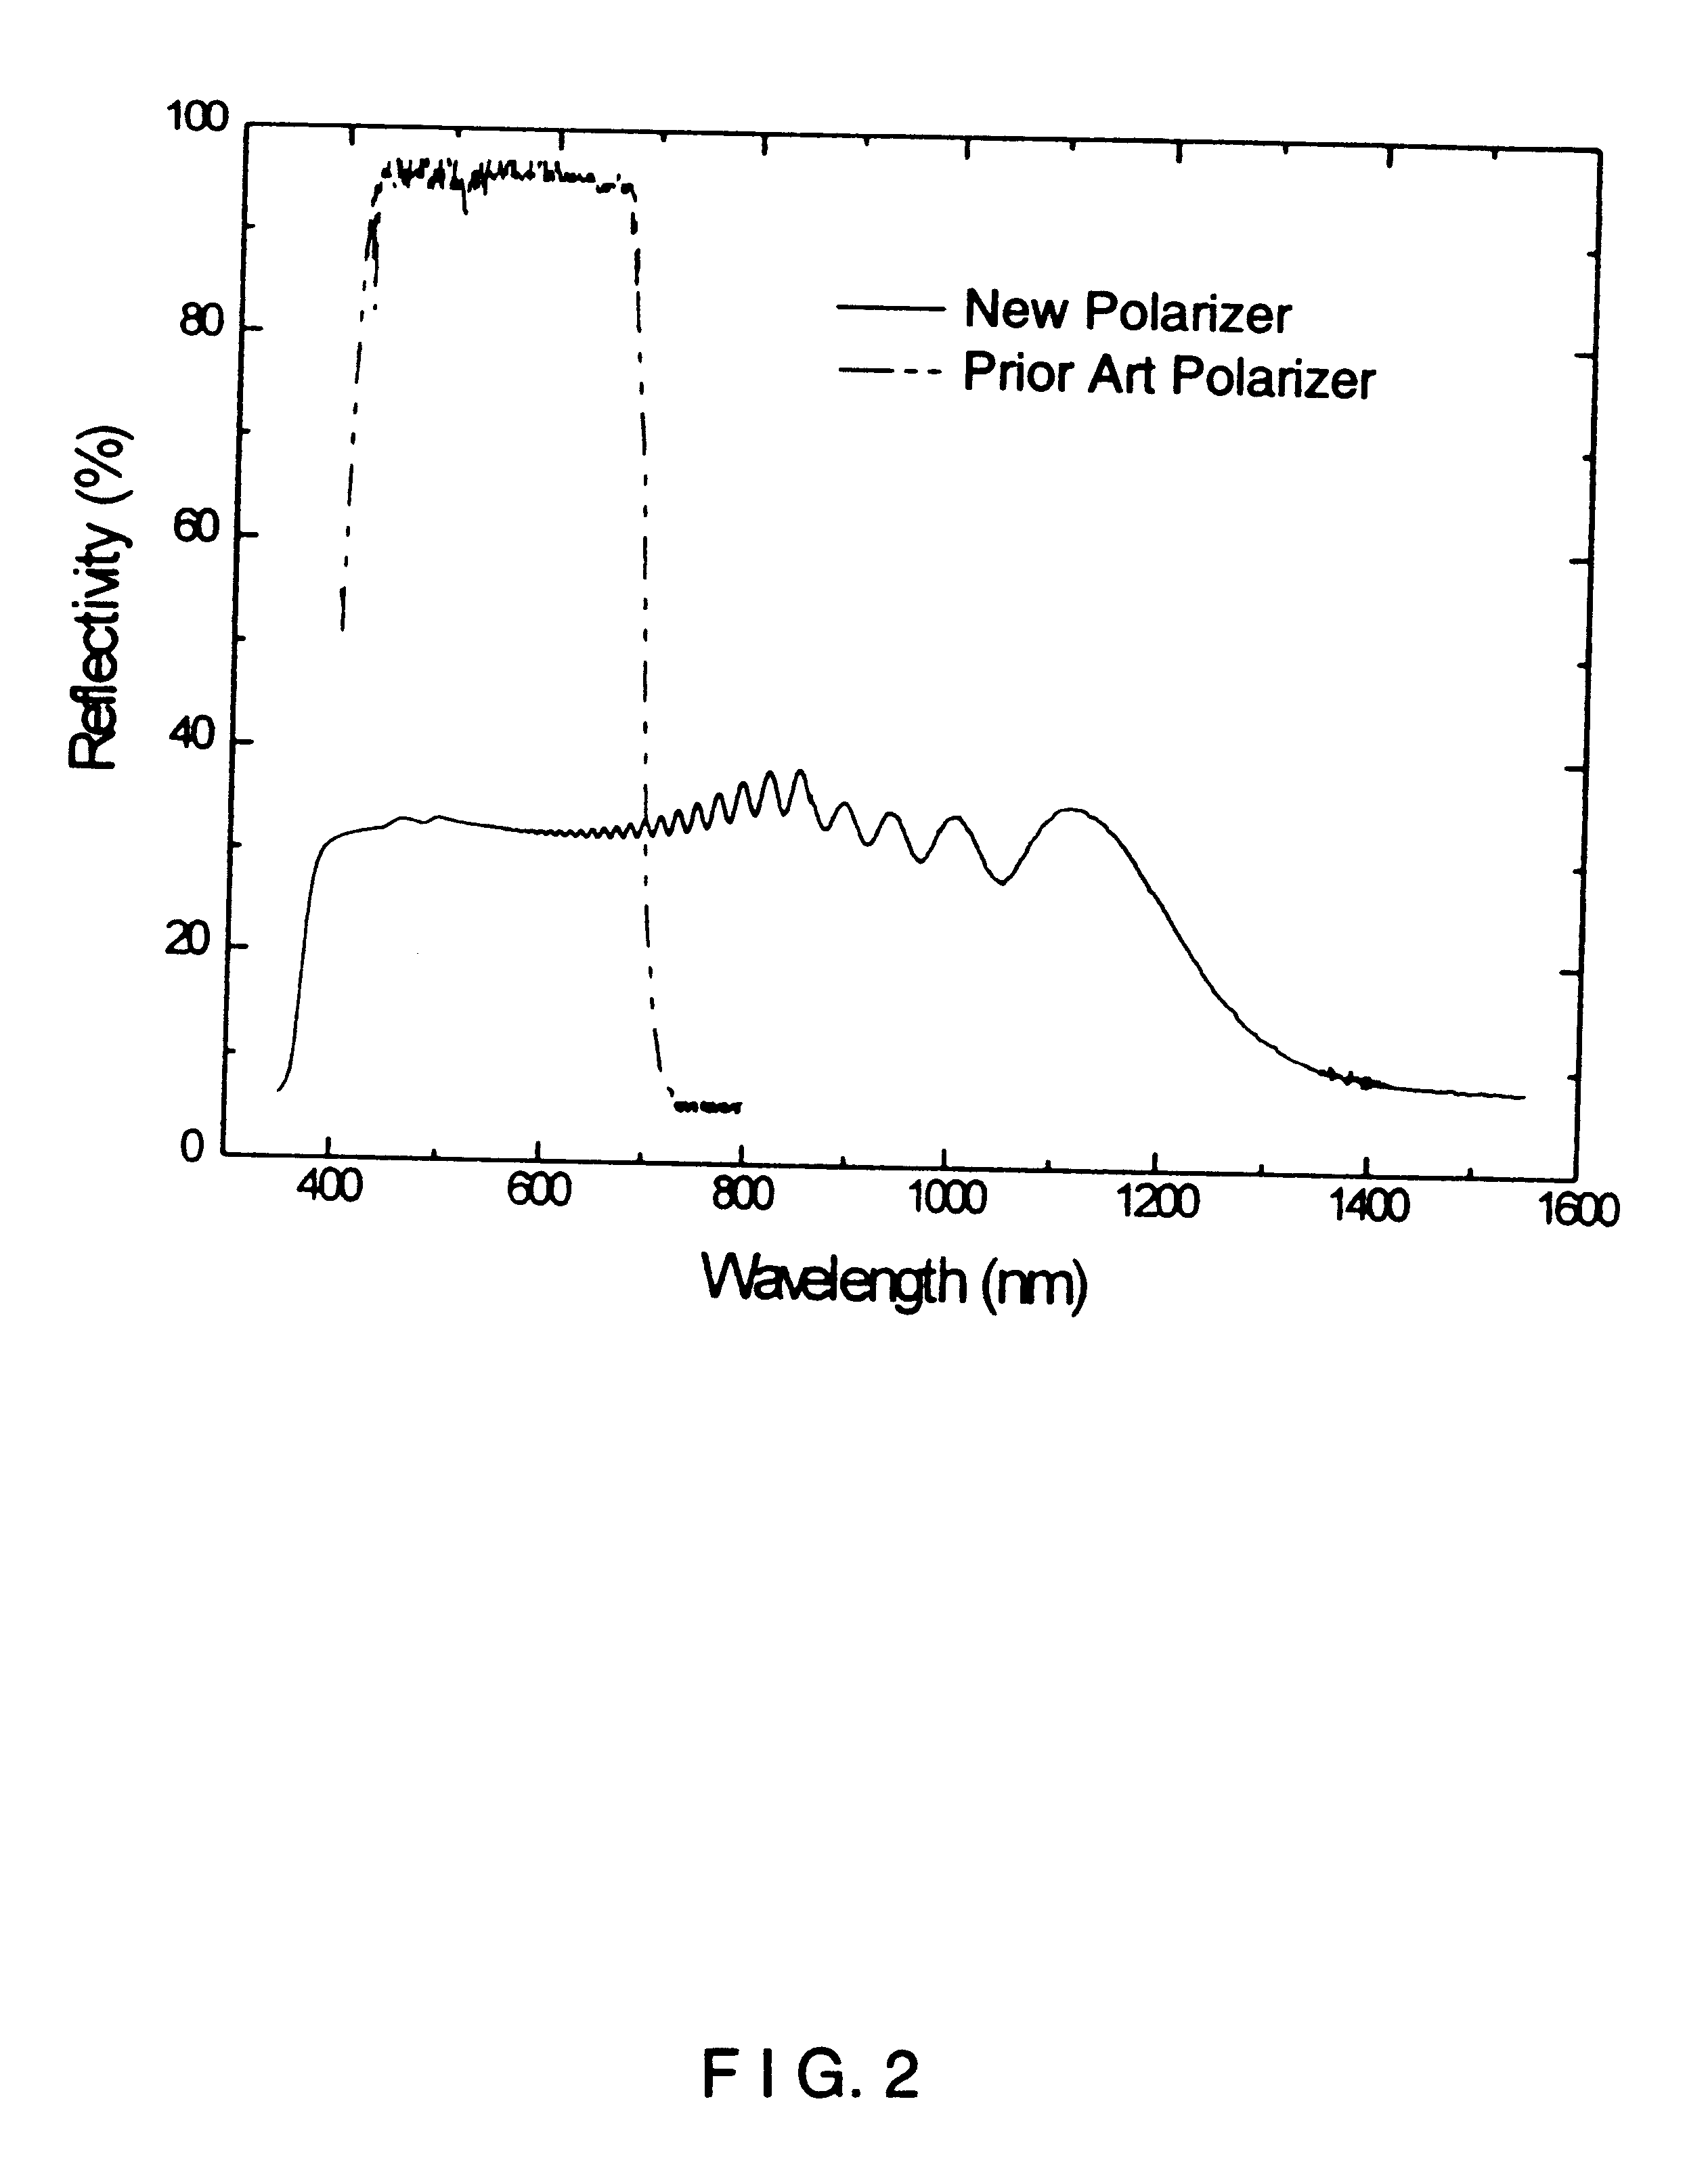 Circularly polarizing reflective material having super broad-band reflection and transmission characteristics and method of fabricating and using same in diverse applications